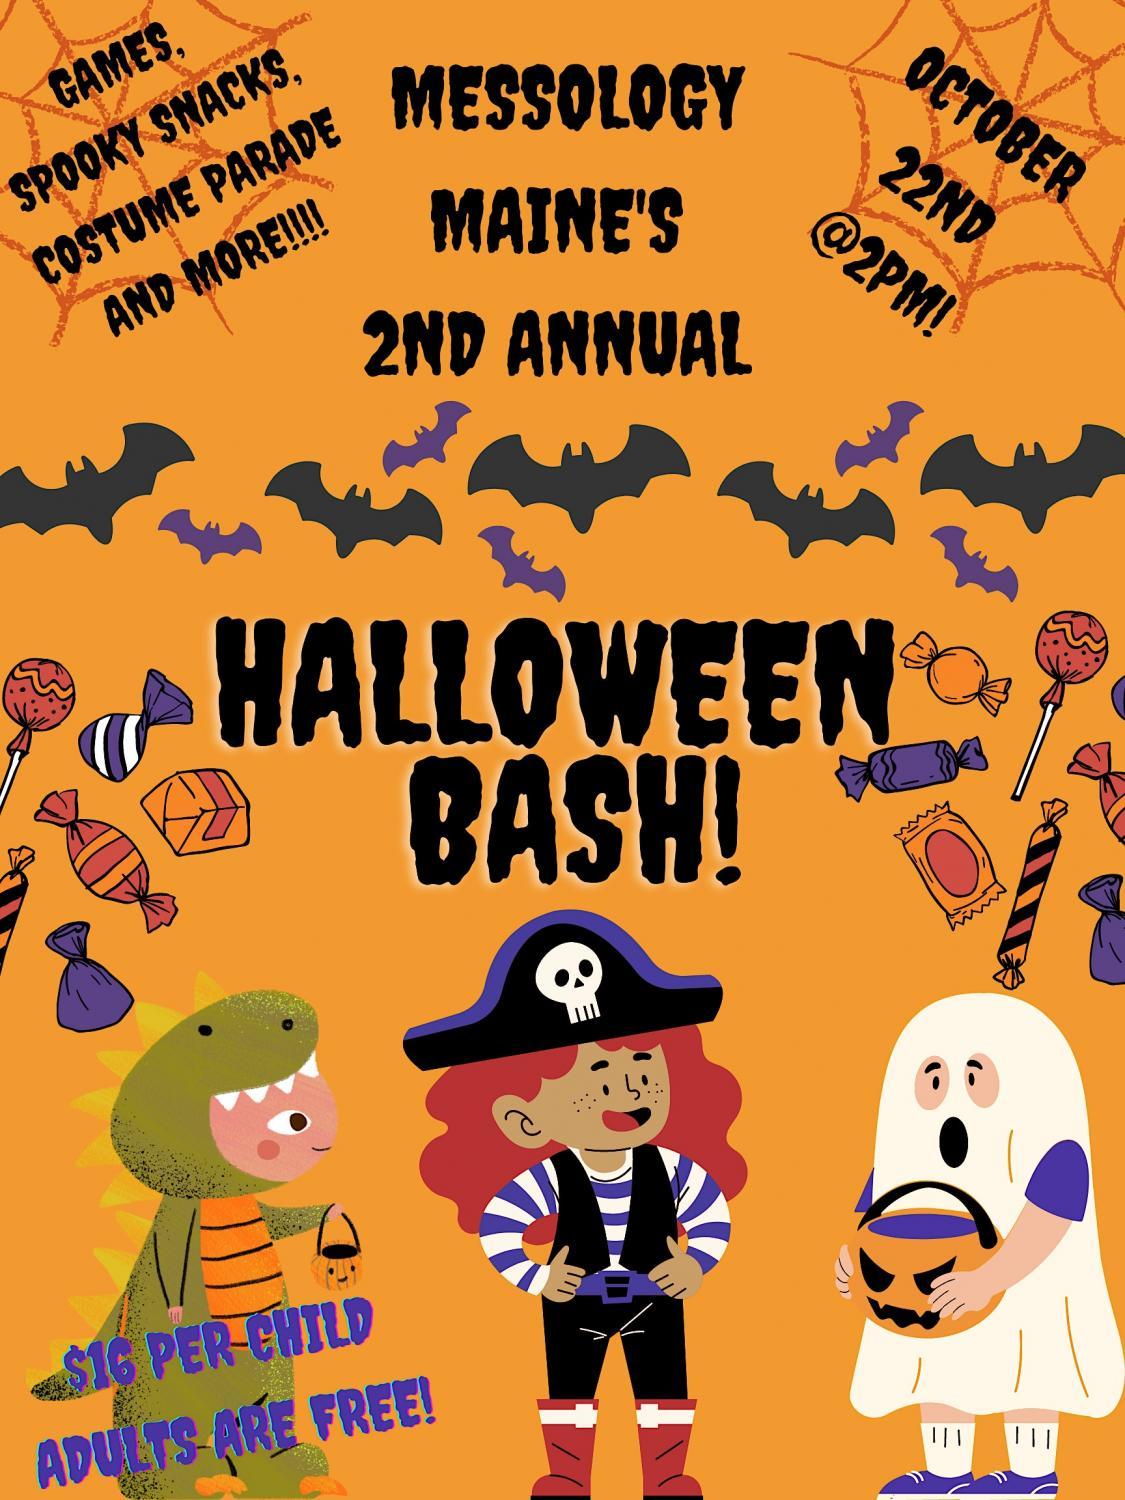 Messology Maine's 2nd Annual Halloween Bash!
Sat Oct 22, 2:00 PM - Sat Oct 22, 5:00 PM
in 2 days